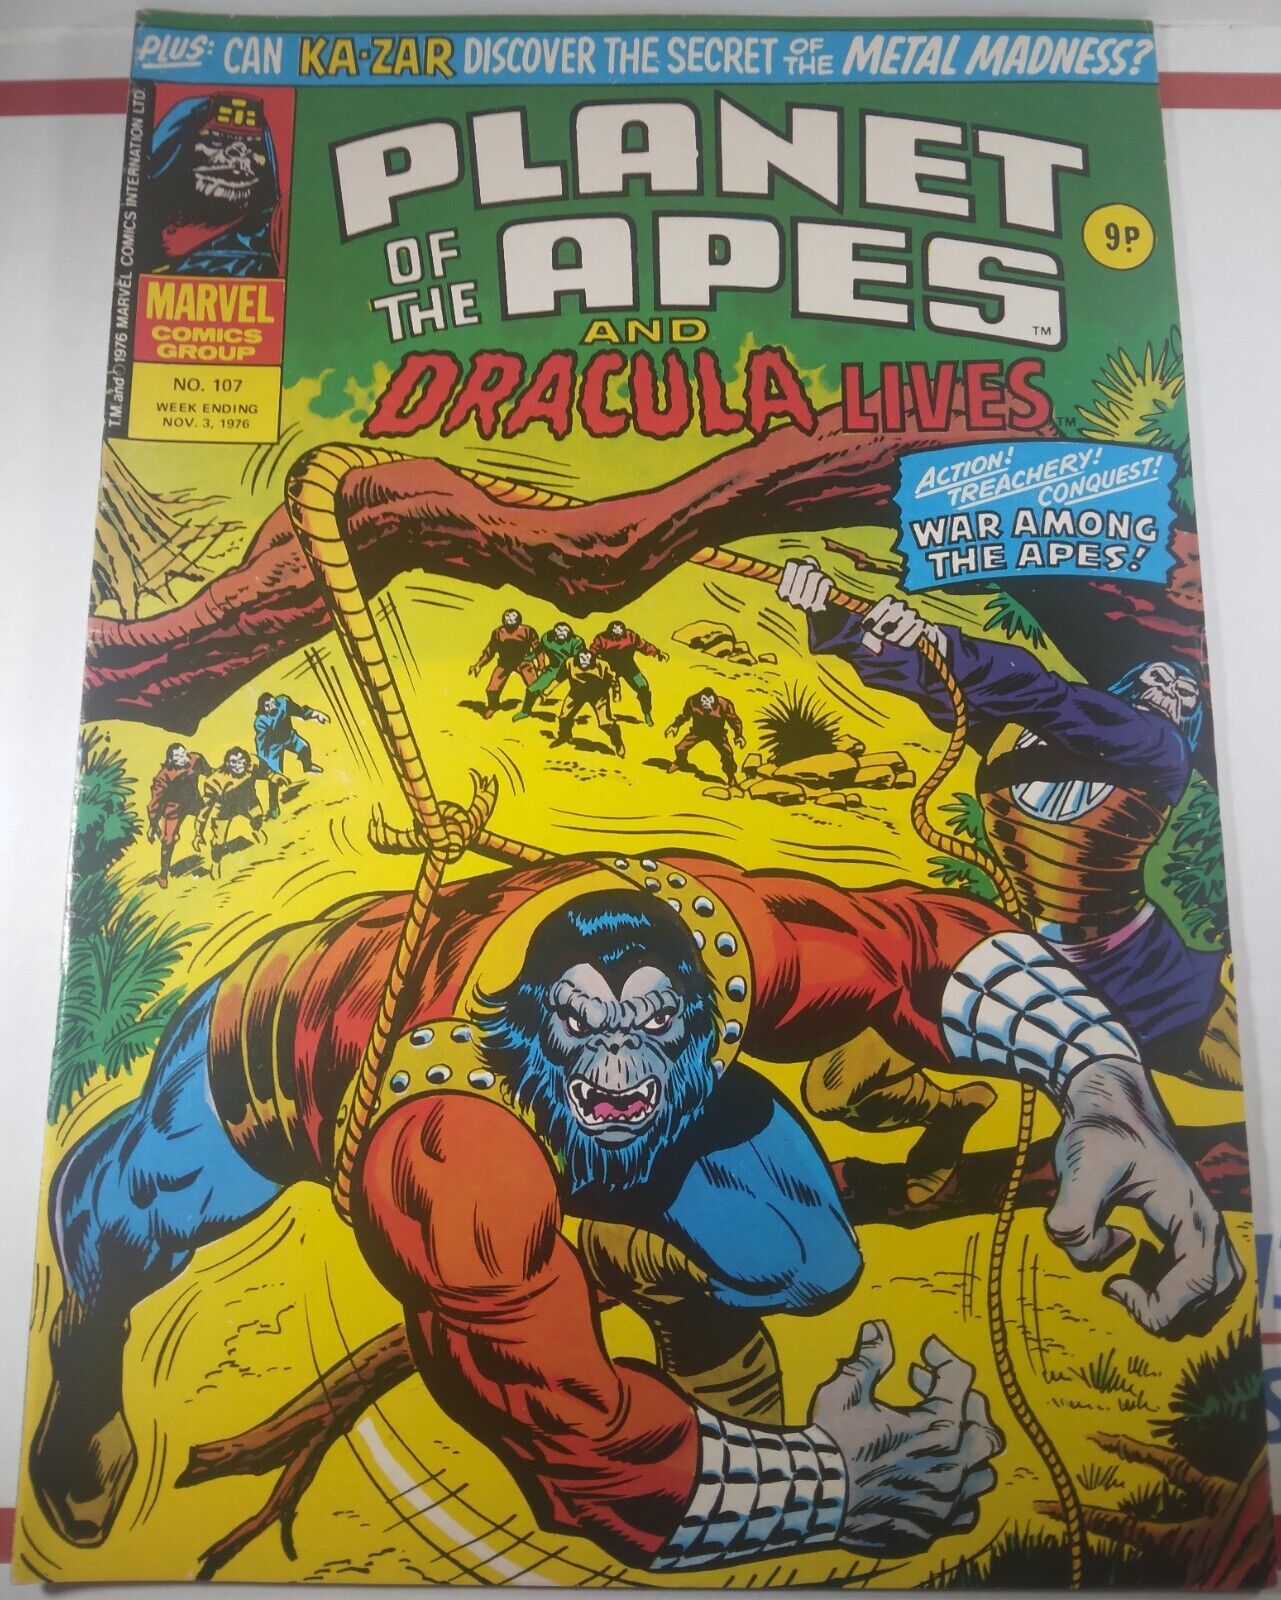 💥 PLANET OF THE APES AND DRACULA LIVES #107 MARVEL UK 1976 KA-ZAR MAN-THING FN